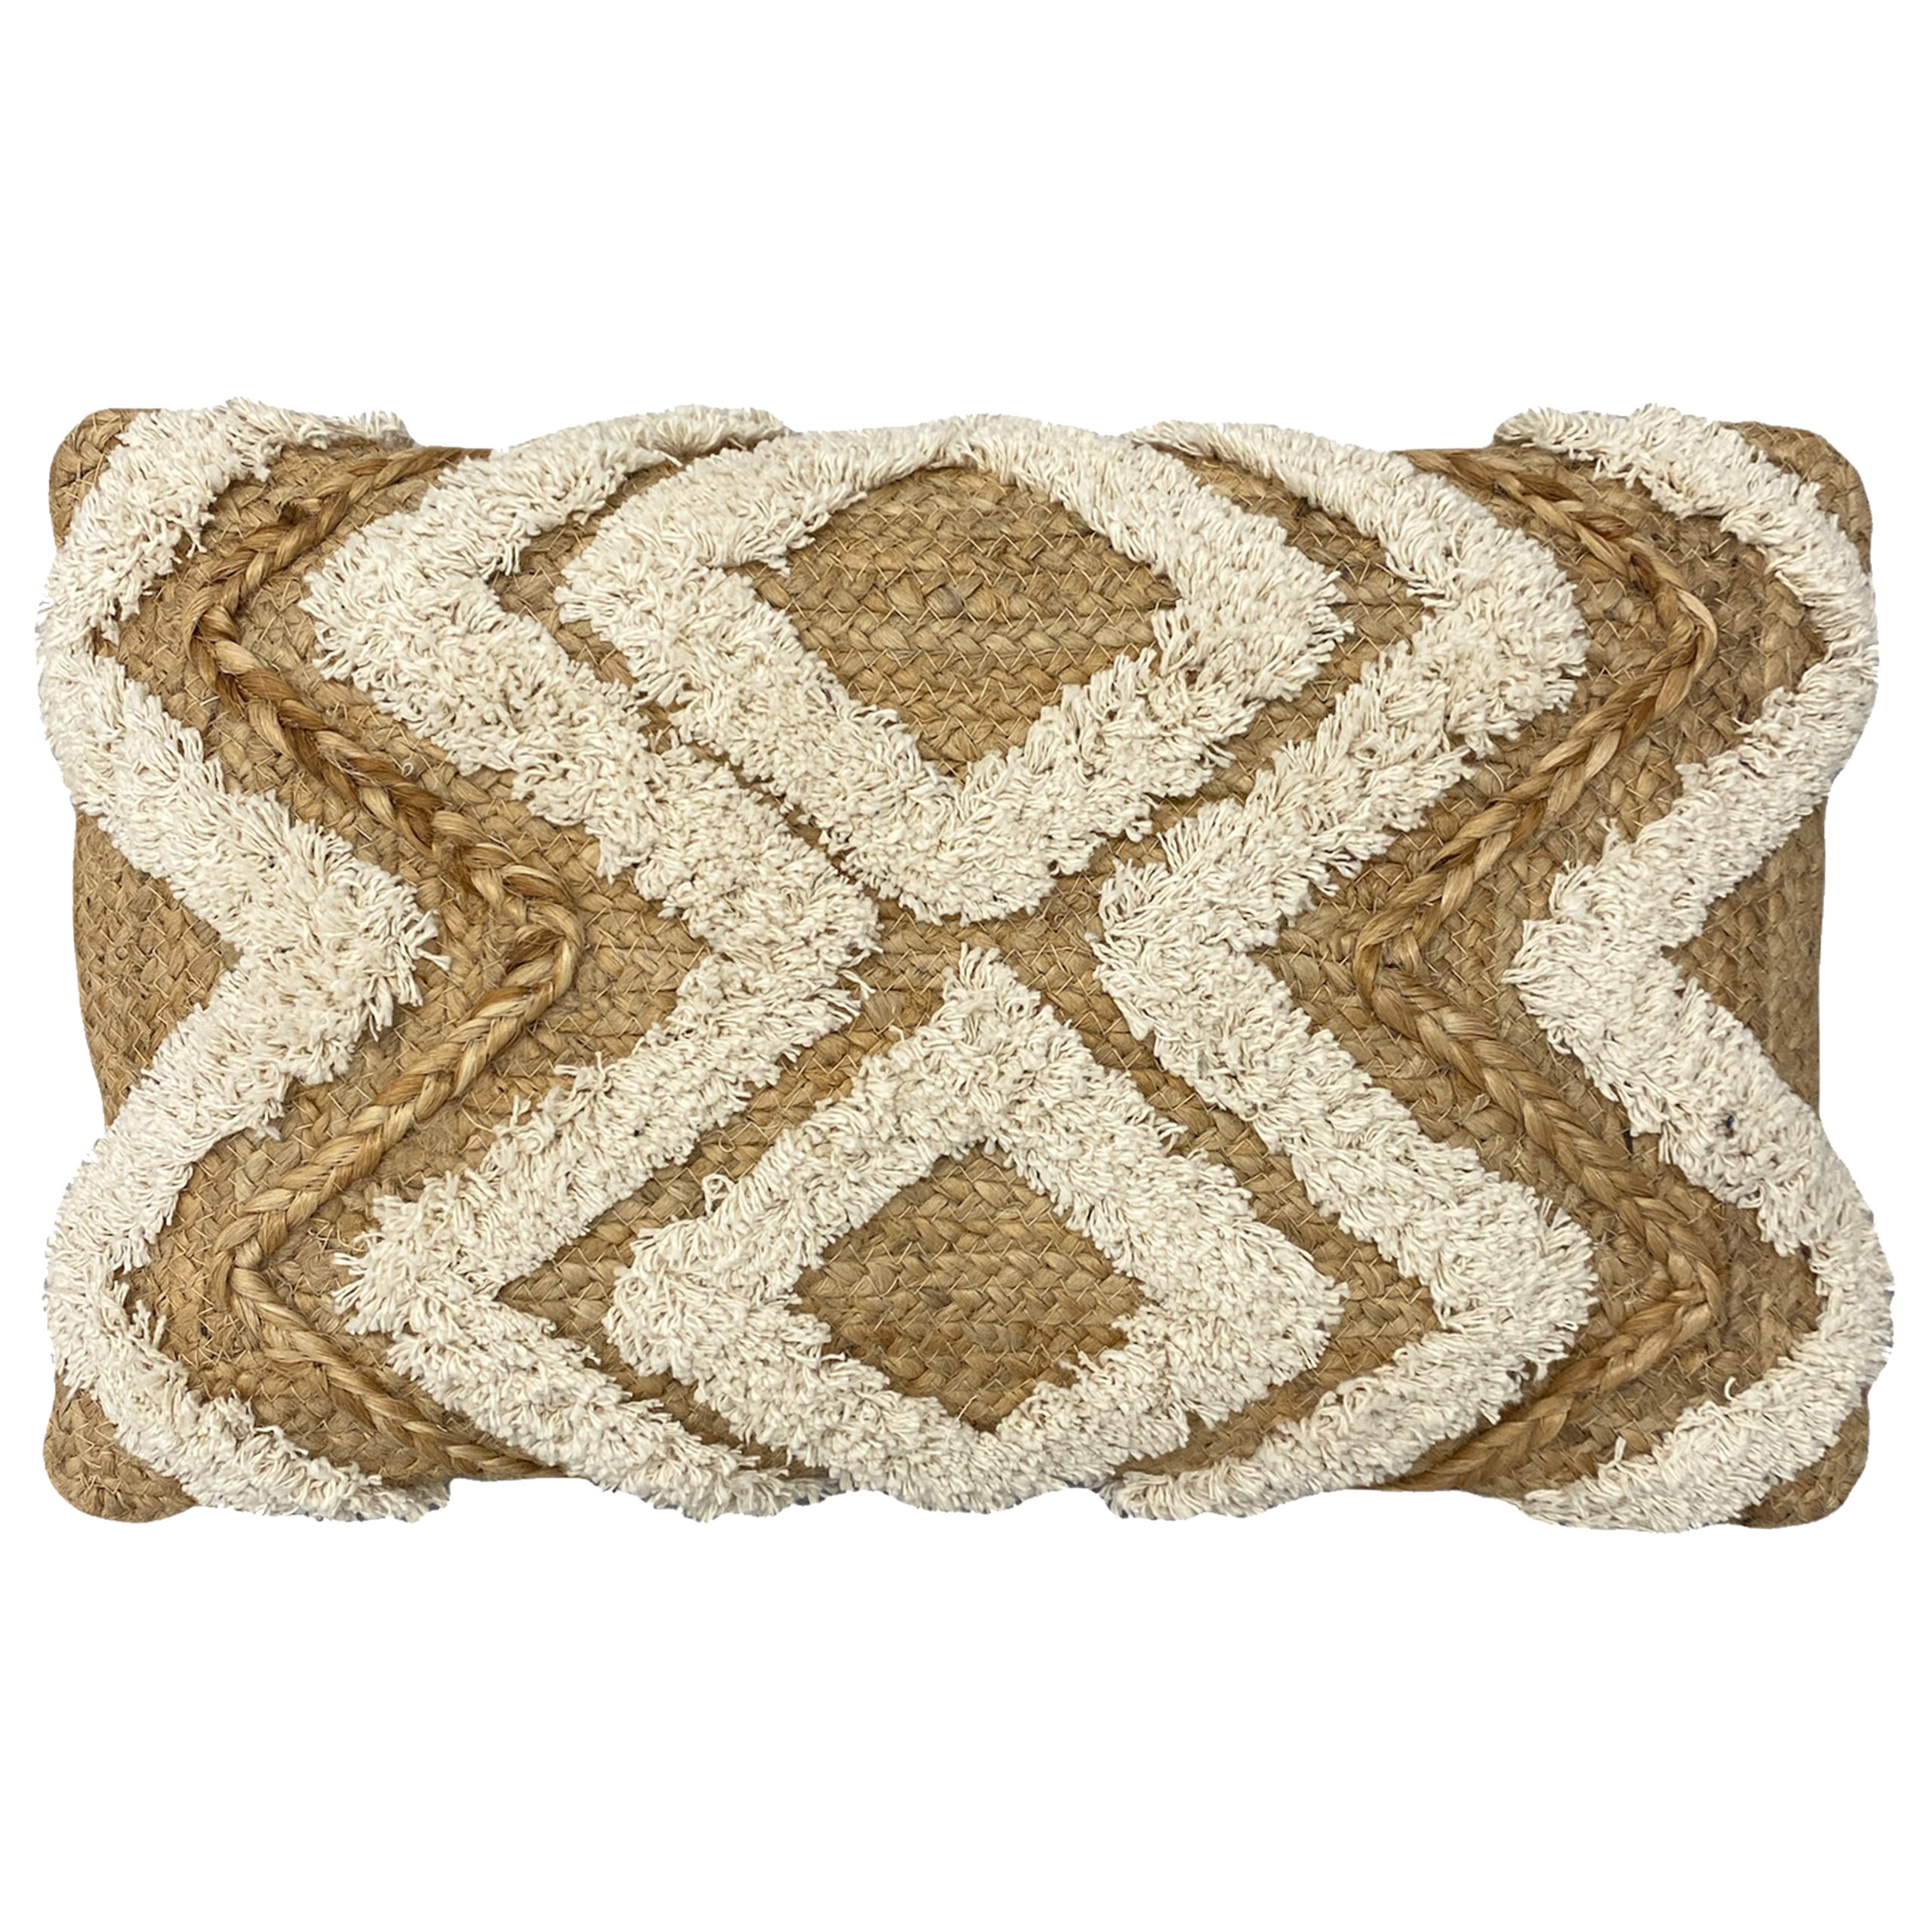 A natural jute cushion featuring contrasting cotton tufting and braid details. Complete with standard knife edging and hidden zip closure. Made of 90% Jute/10% Cotton, making this cushion super comfy and durable.